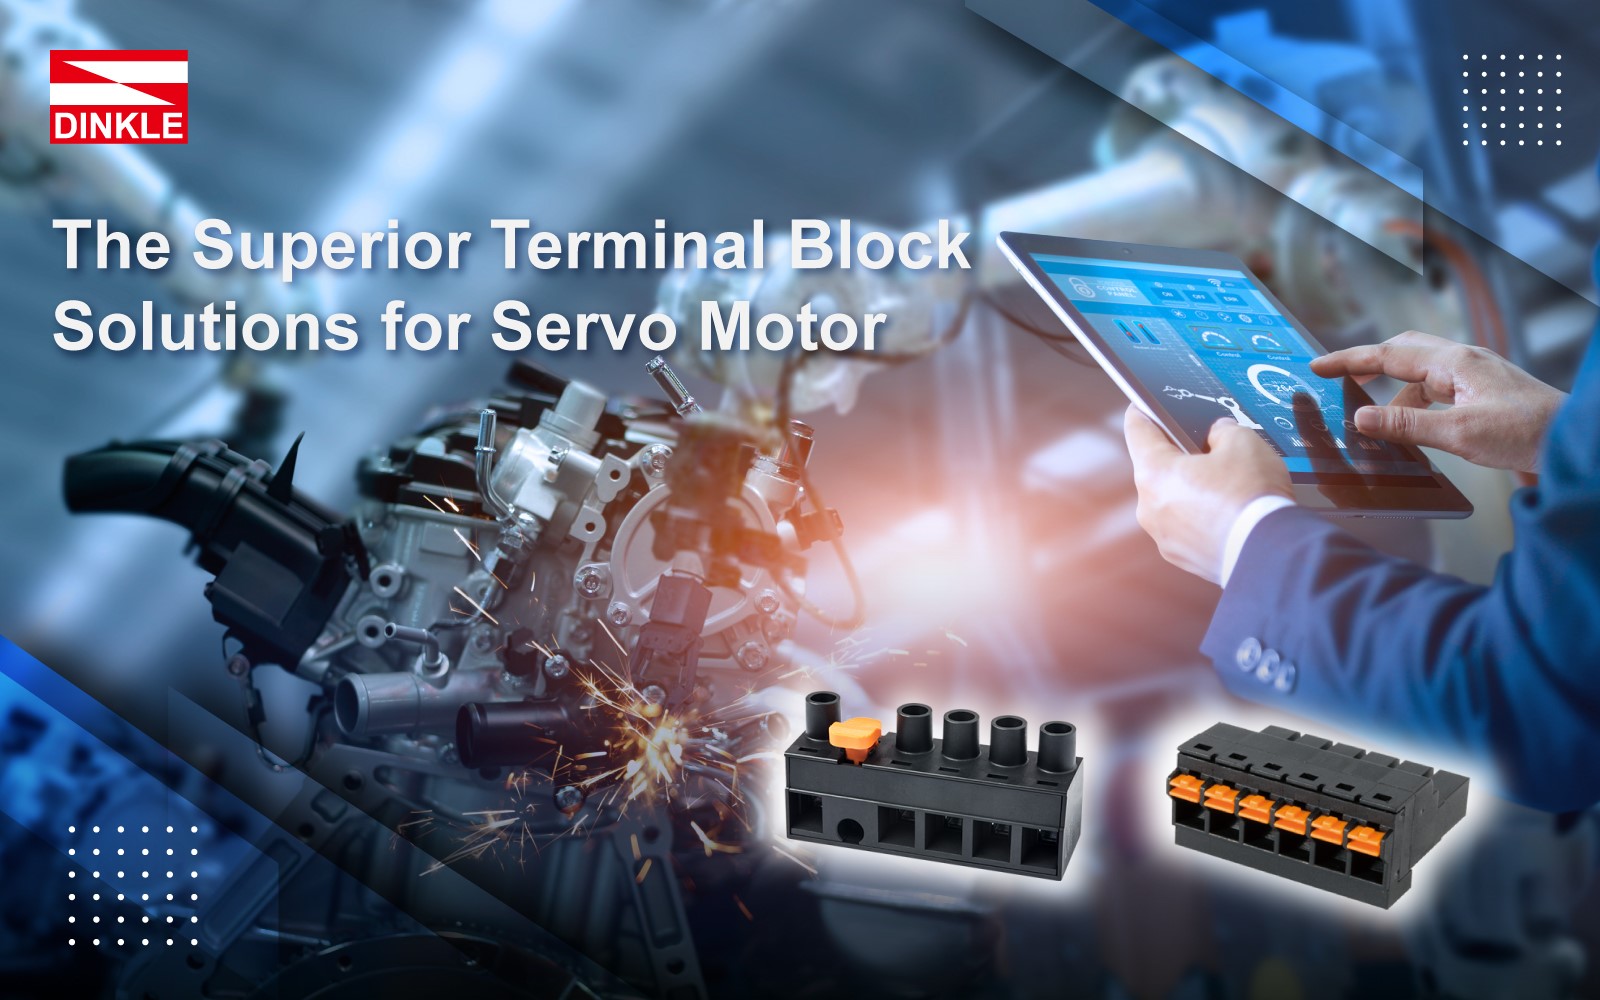 The Superior Terminal Block Solutions for Servo Motor